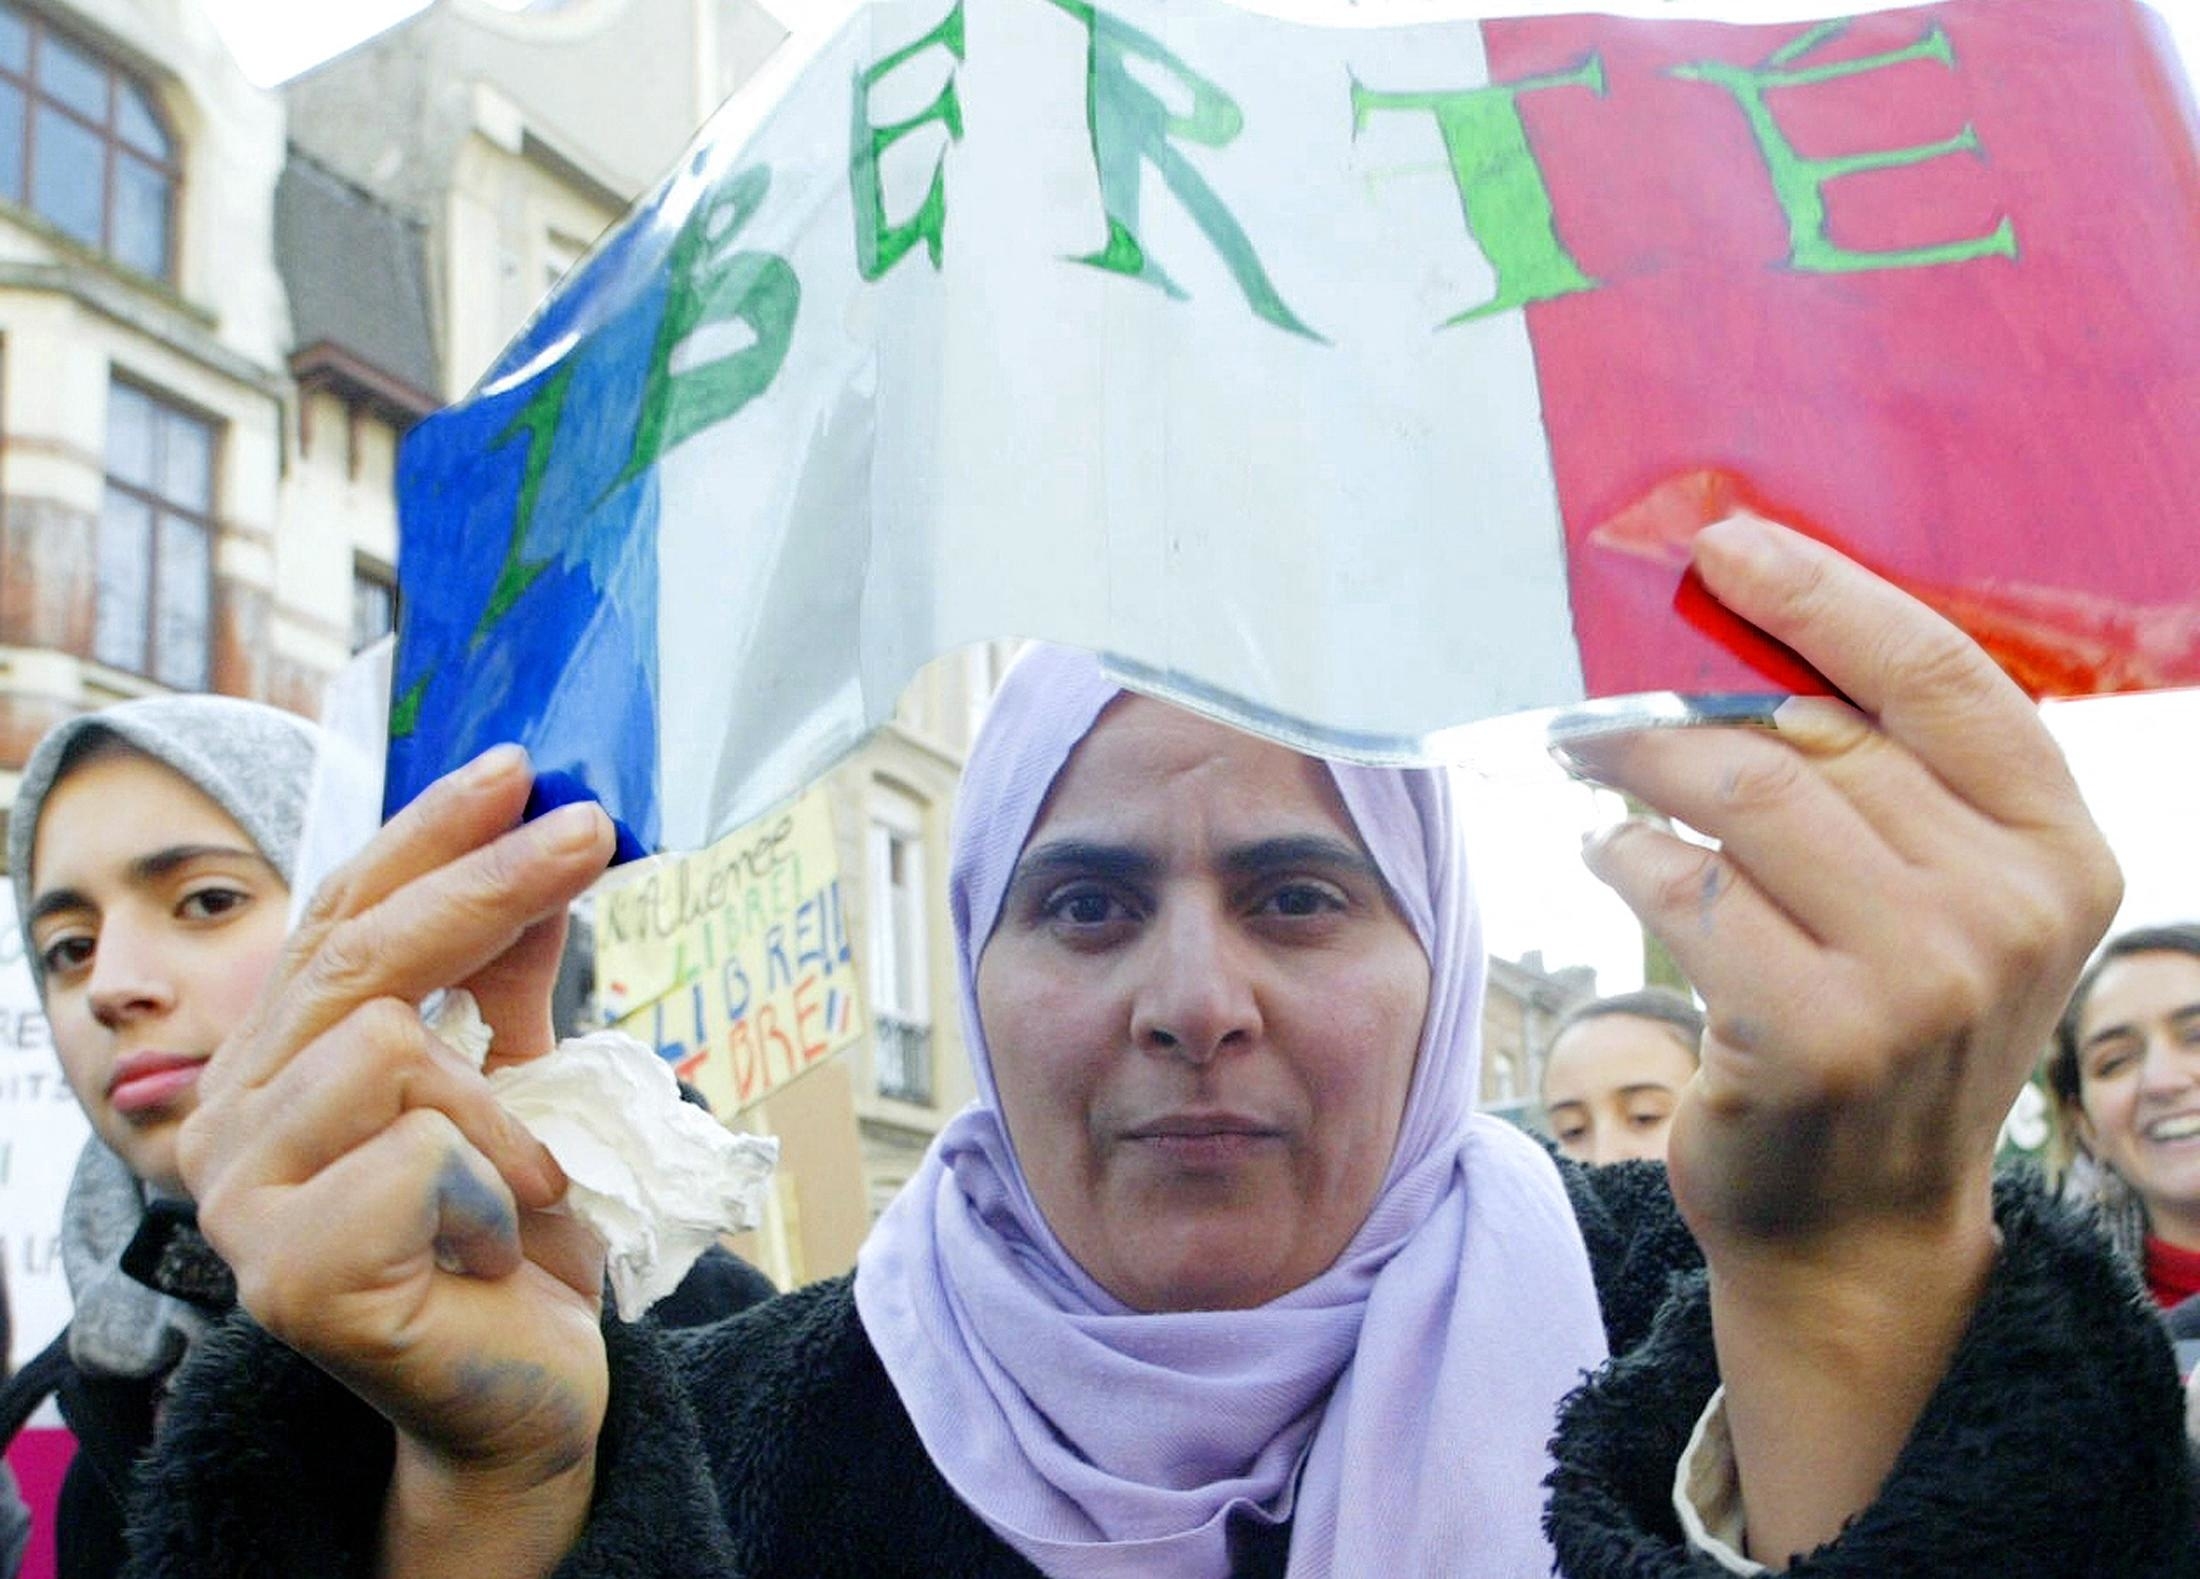 Woman holding a sign with &#x27;LIBERTE&#x27; at a demonstration, surrounded by others